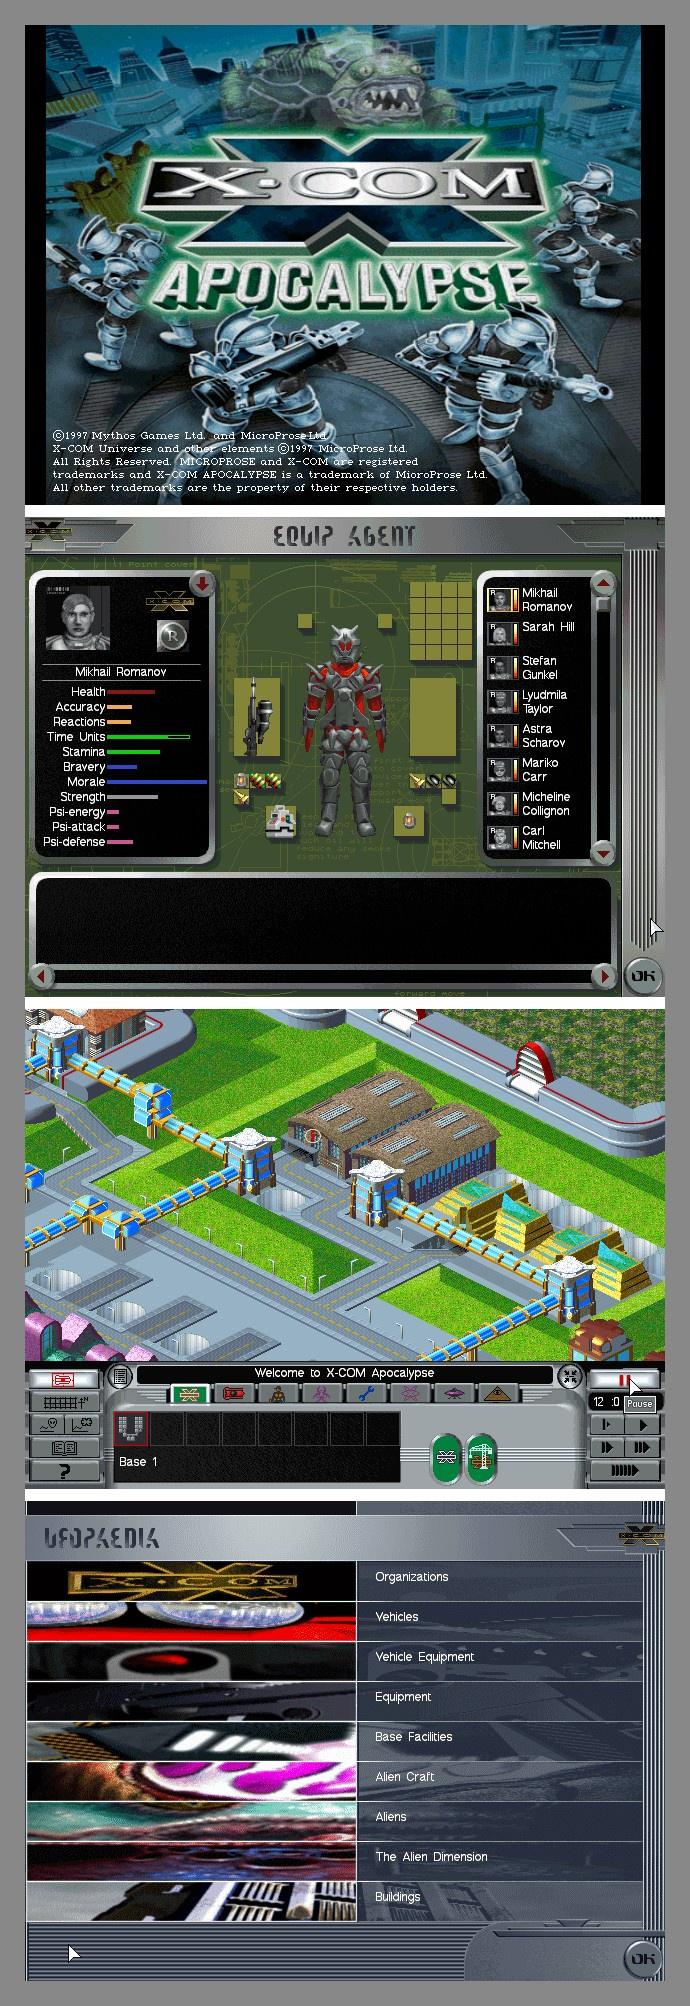 Image For Post | **Development**
The X-Com: Apocalypse design went through a number of significant changes before release, including the controversial introduction of real-time action in tactical combat. Pre-release concerns about this change ultimately led to a compromise: the option to choose between turn-based and real-time combat.

A lot more things besides that were planned to be in the game, but were never finished due to lack of time and problems implementing it. This includes multiplayer support (for up to 8 players with hotseat, play by email or lan), a large number of skills for the agents (driving, flying, perceptive ability and sanity among others), a scenario generator to quickly start a tactical missions with as many sides as you'd want (and you could control anyone, from any organization to the aliens themselves), multiple random generated alien dimensions, among other things.

Actually, some of these things was programmed and were in a somewhat working state in the beta stage, but they were removed for the retail release.

**XCOM agents**
Originally the plan was for all the XCOM agents to have ability in research and engineering as well as combat skills, and you must hire the best agents. That feature unfortunately did not survive the game, and the game ended up with separate engineers and researchers apart from the XCOM agents, but if you look closely, they use the same agent recruitment interface.

**Open-source remake**
In 2014 a group of developers formed to remake the game from scratch in C++, under the OpenApoc title. By 2018 the remake had reached an Alpha release state with the entire game playable from start to end and a growing community of developers and players.

**Alternate Titles**
"幽浮：啟示錄" -- Traditional Chinese spelling
"APOC" -- Informal name